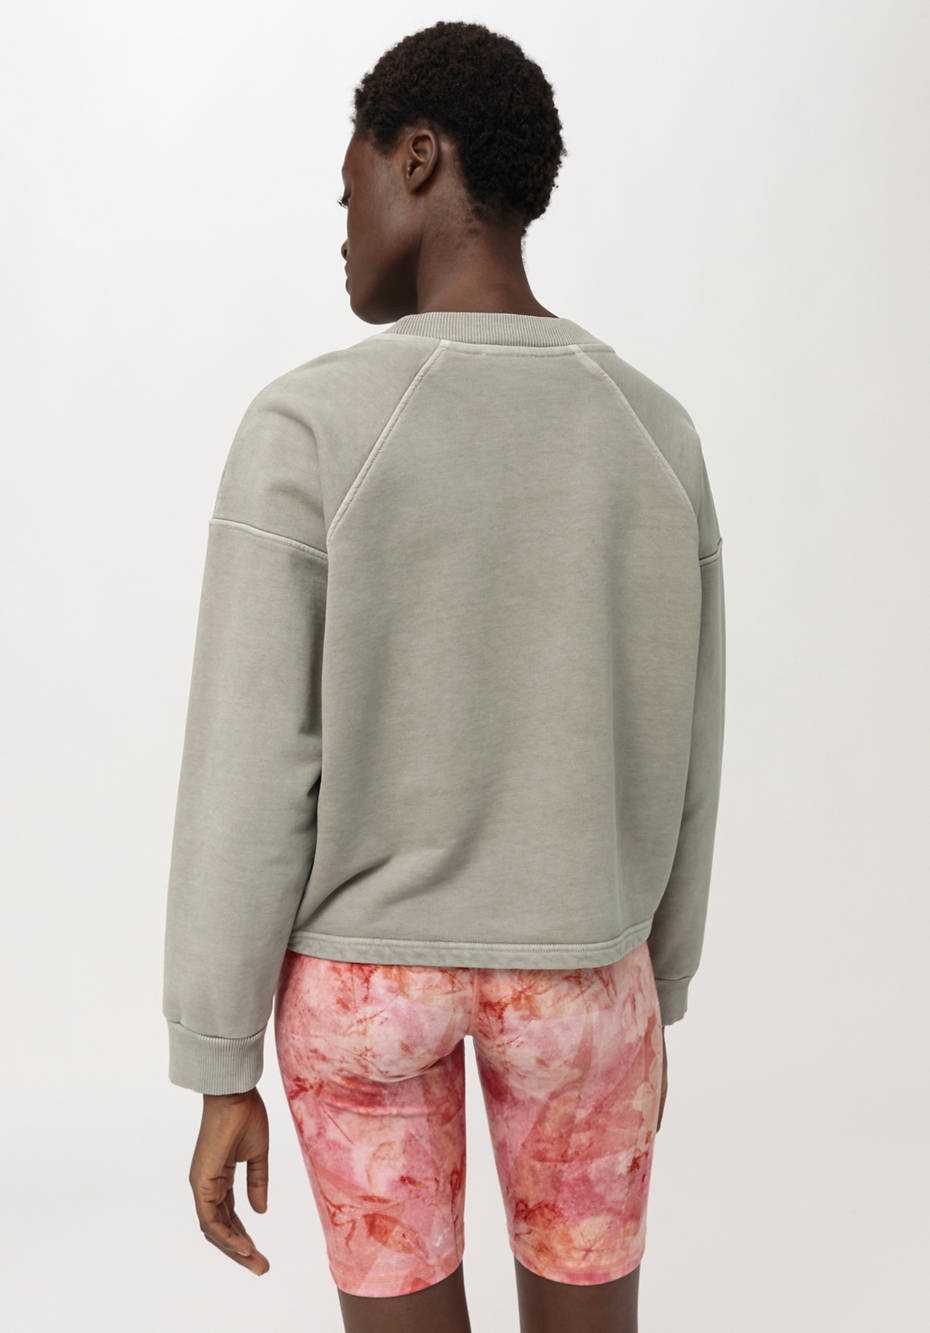 Mineral-dyed sweatshirt made of pure organic cotton